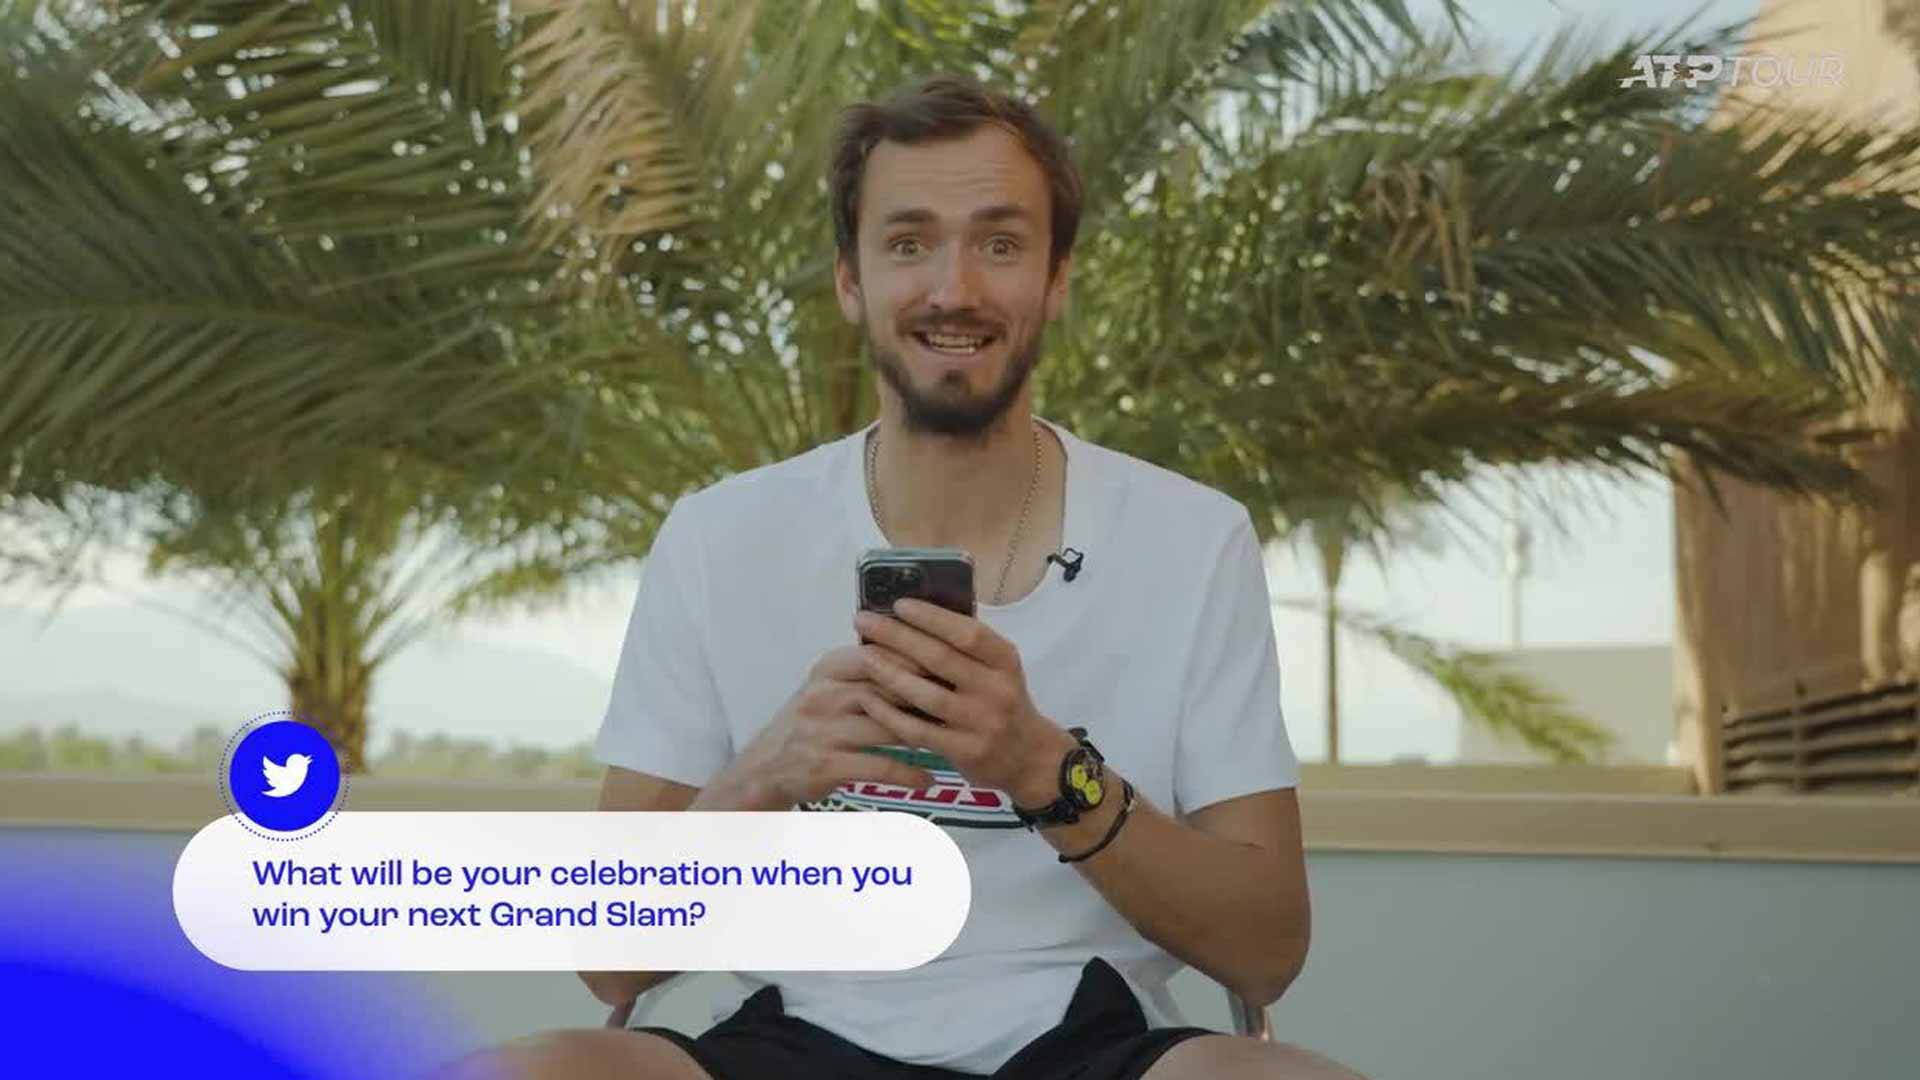 Daniil Medvedev takes questions from fans in the latest ATP Uncovered series.